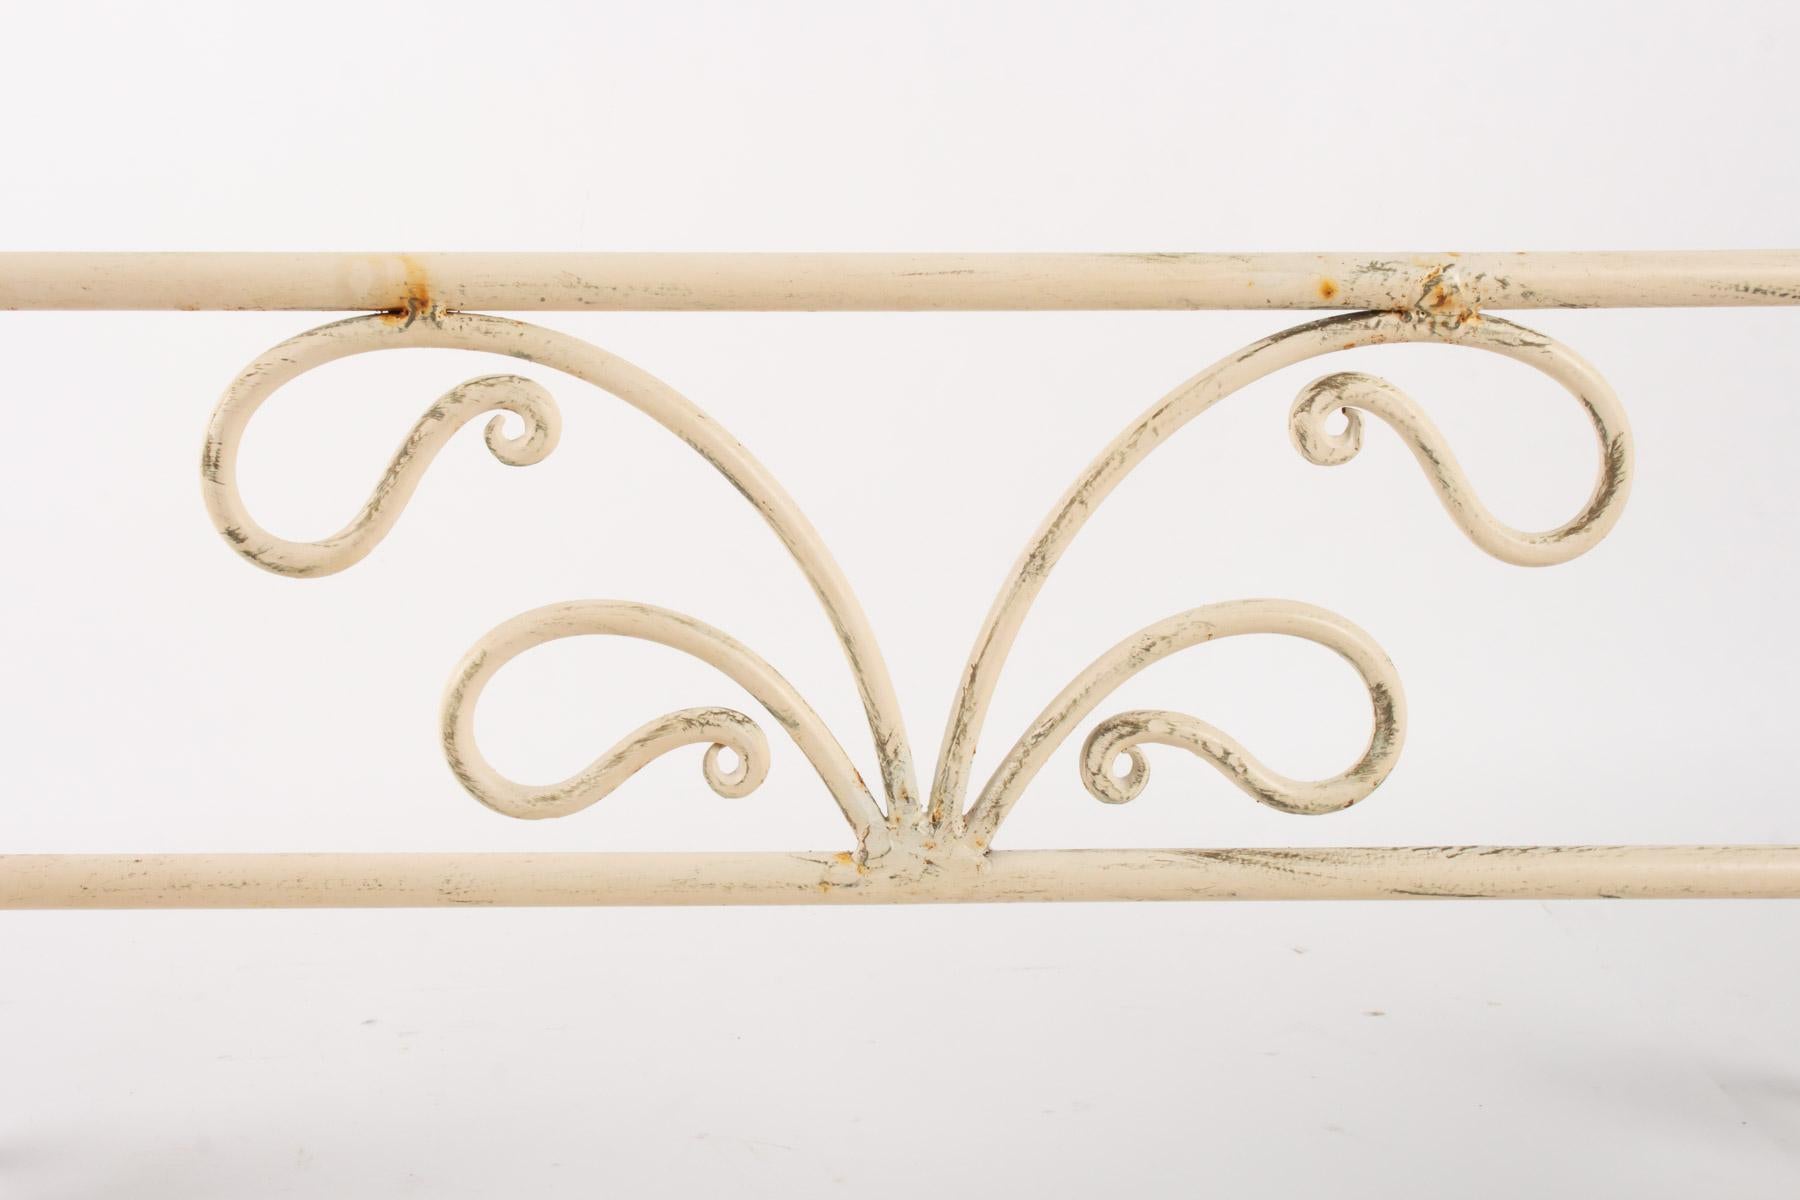 Metal Wrought Iron Towel Bar from the Beginning of the 20th Century Style, 1900-1920